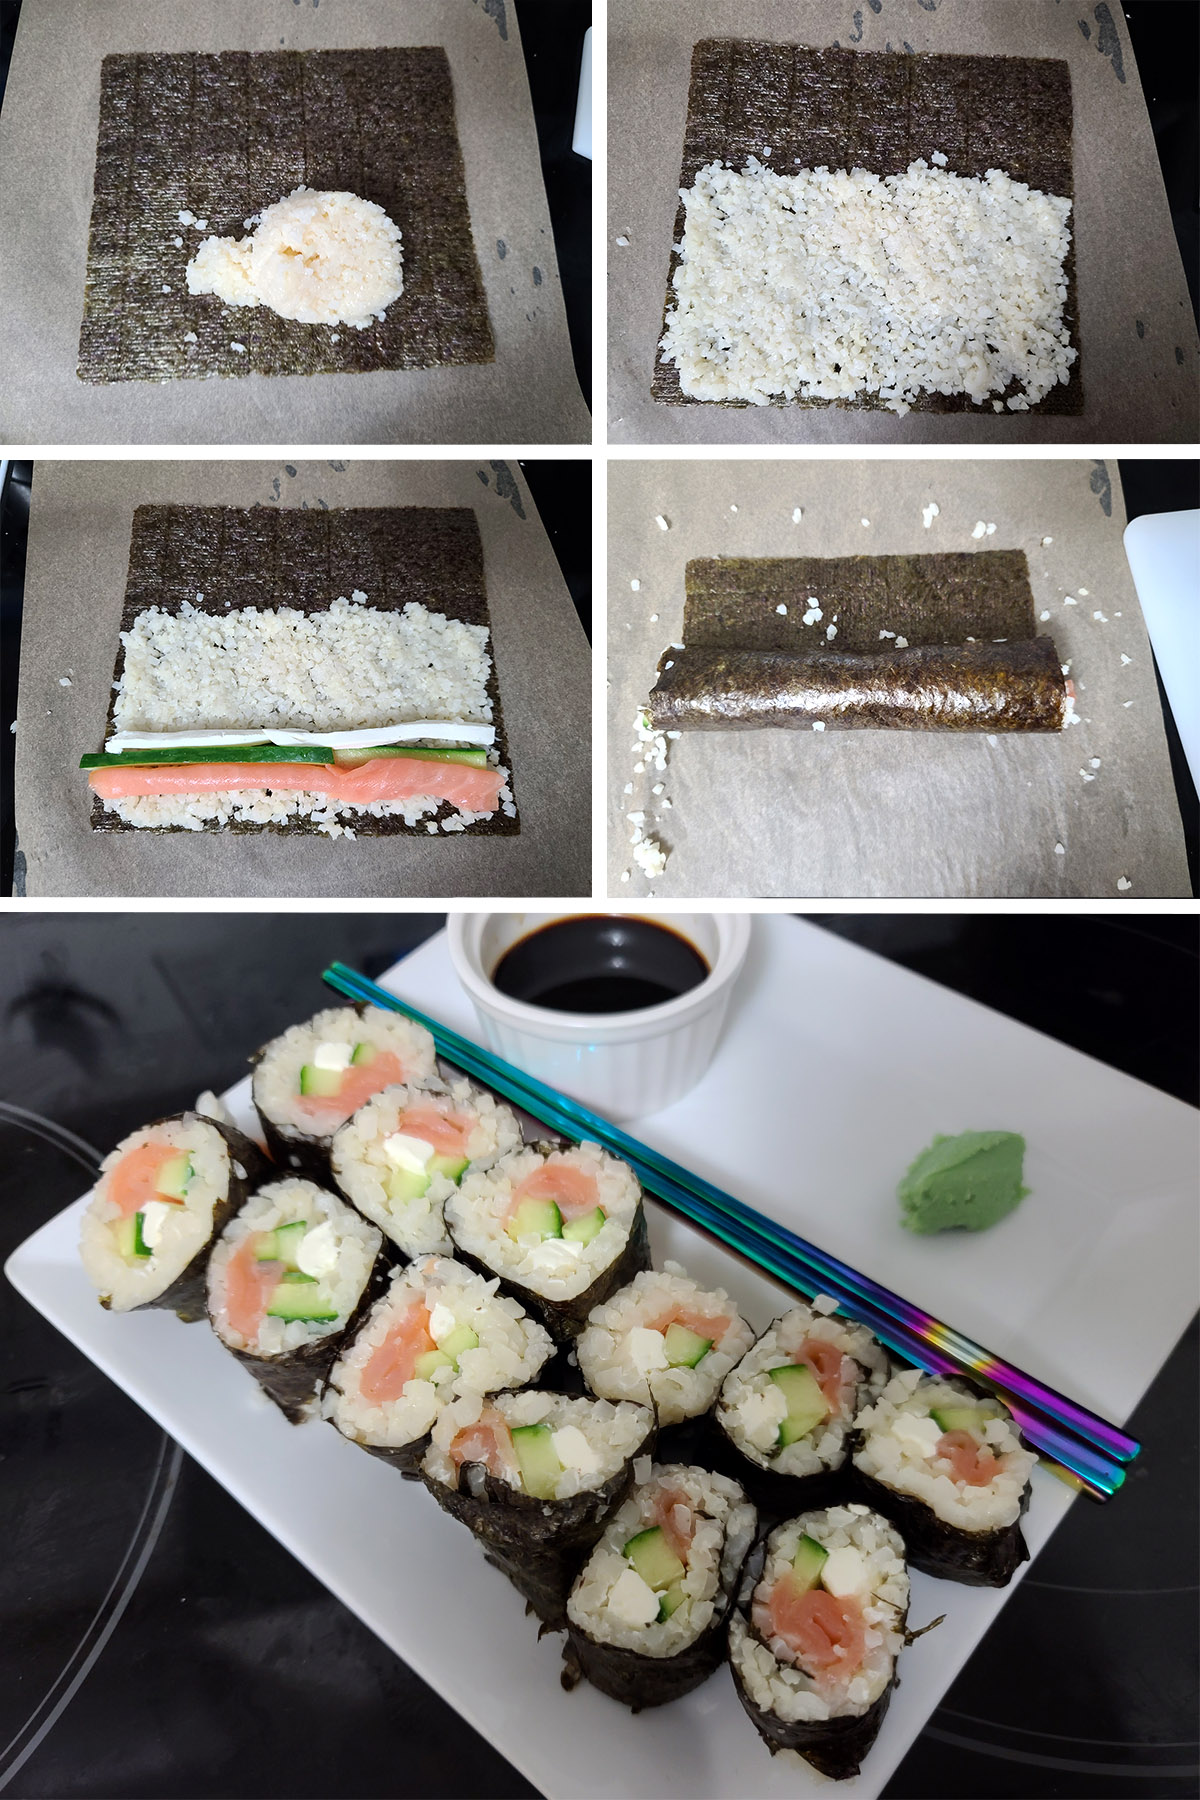 A 5 part image showing a piece of nori being spread with cauliflower sushi rice, topped with smoked salmon, cream cheese, and cucumber, then rolled up.